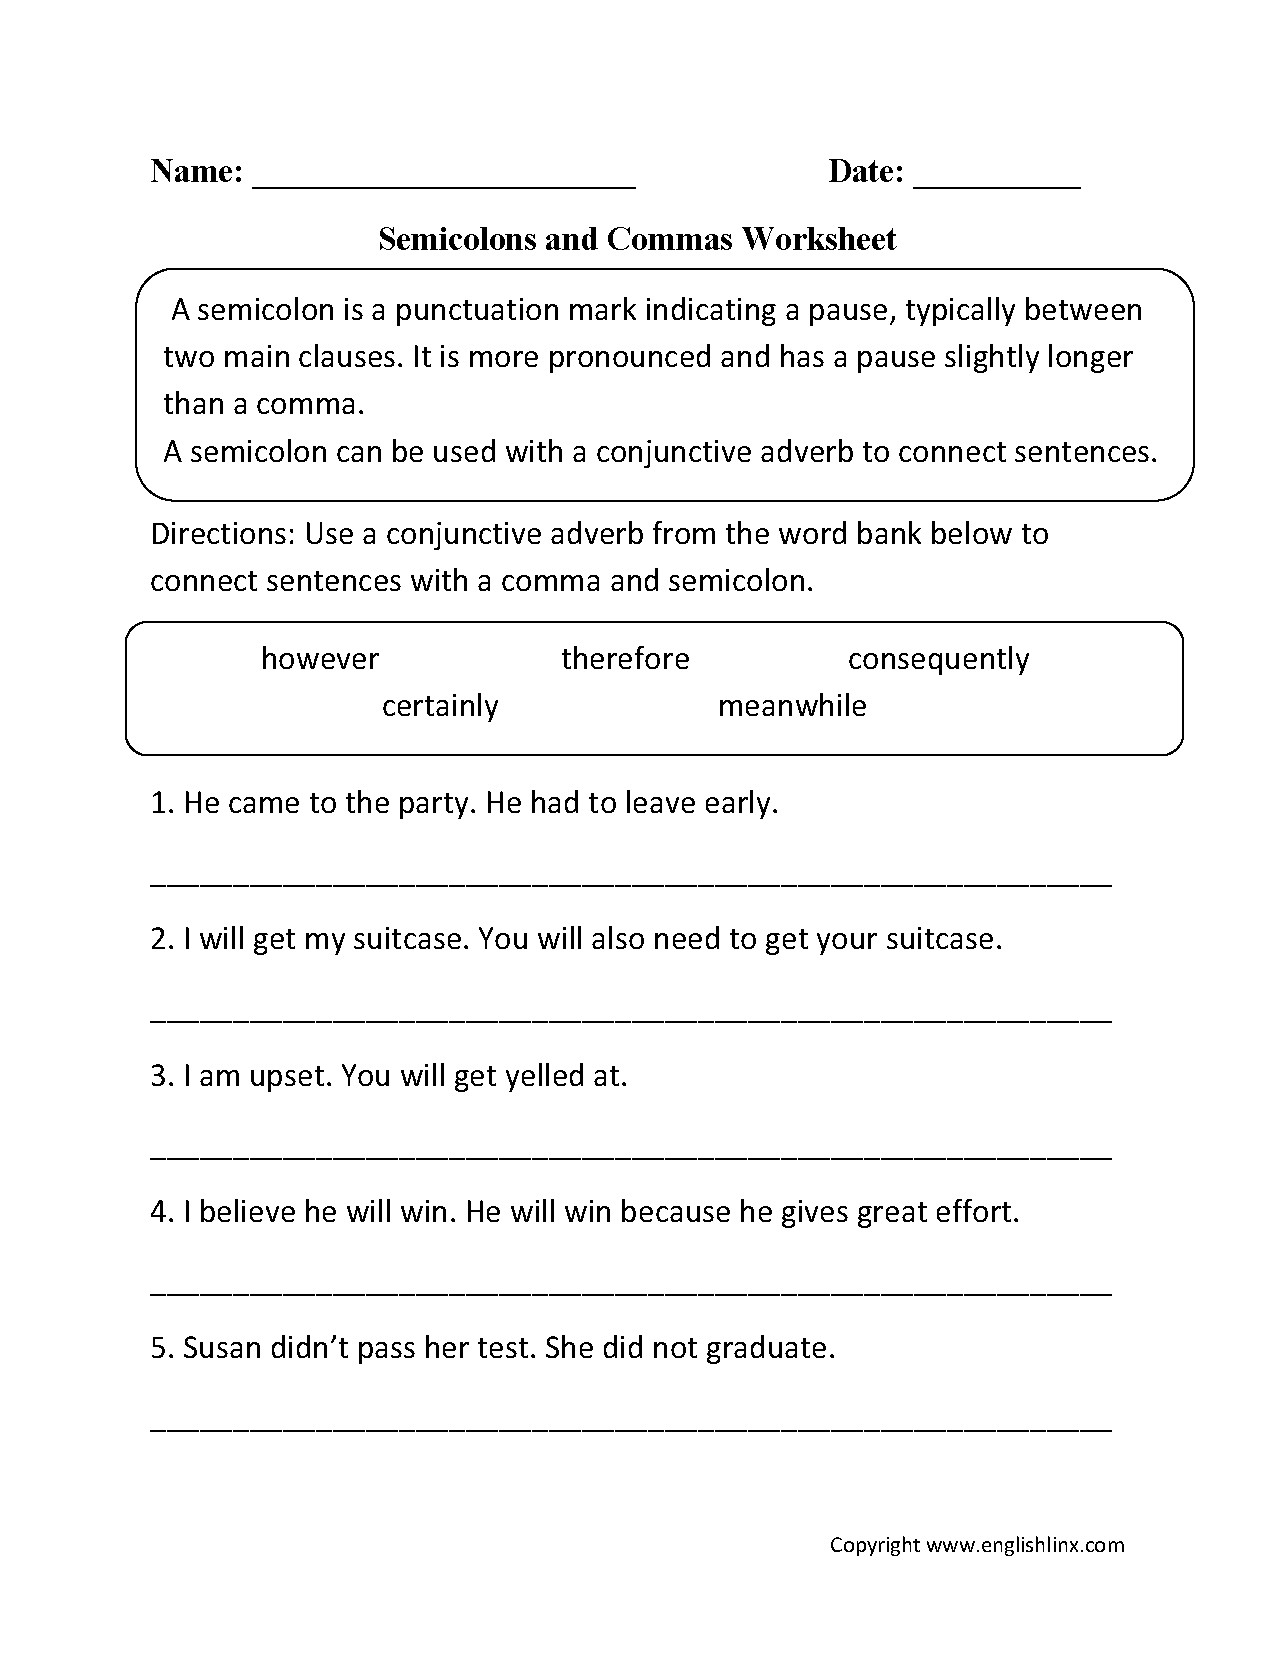 Semicolons and Colons Worksheet Mas Colon S Worksheet